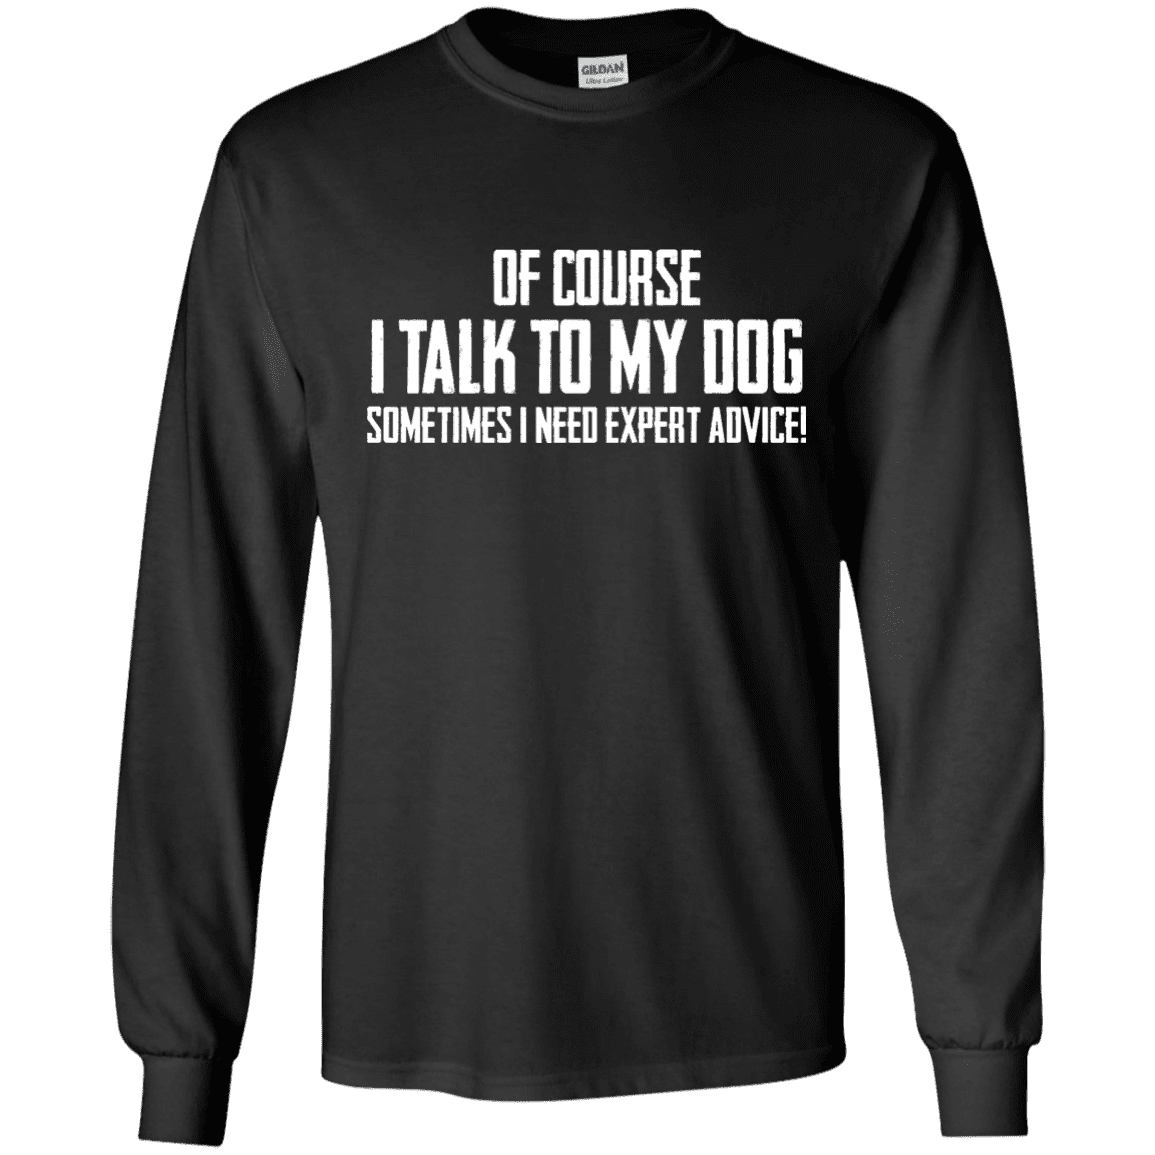 Of Course I Talk To My Dog - Long Sleeve T Shirt.